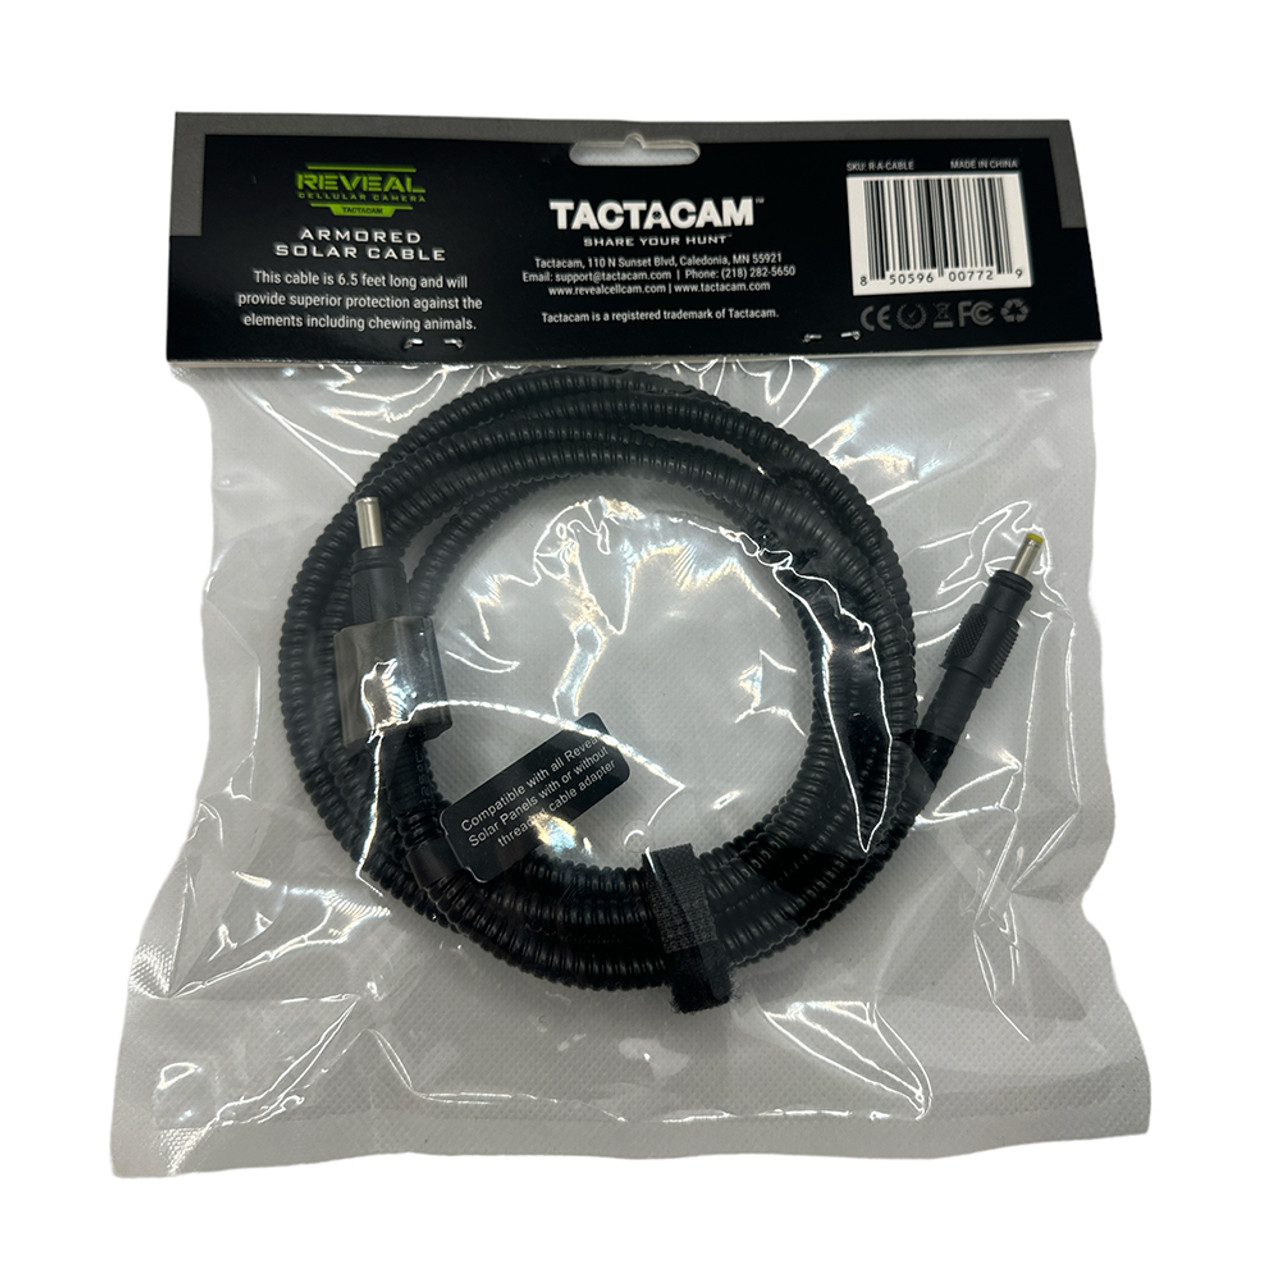 Back Side of Tactacam Reveal Armored Cable in Package